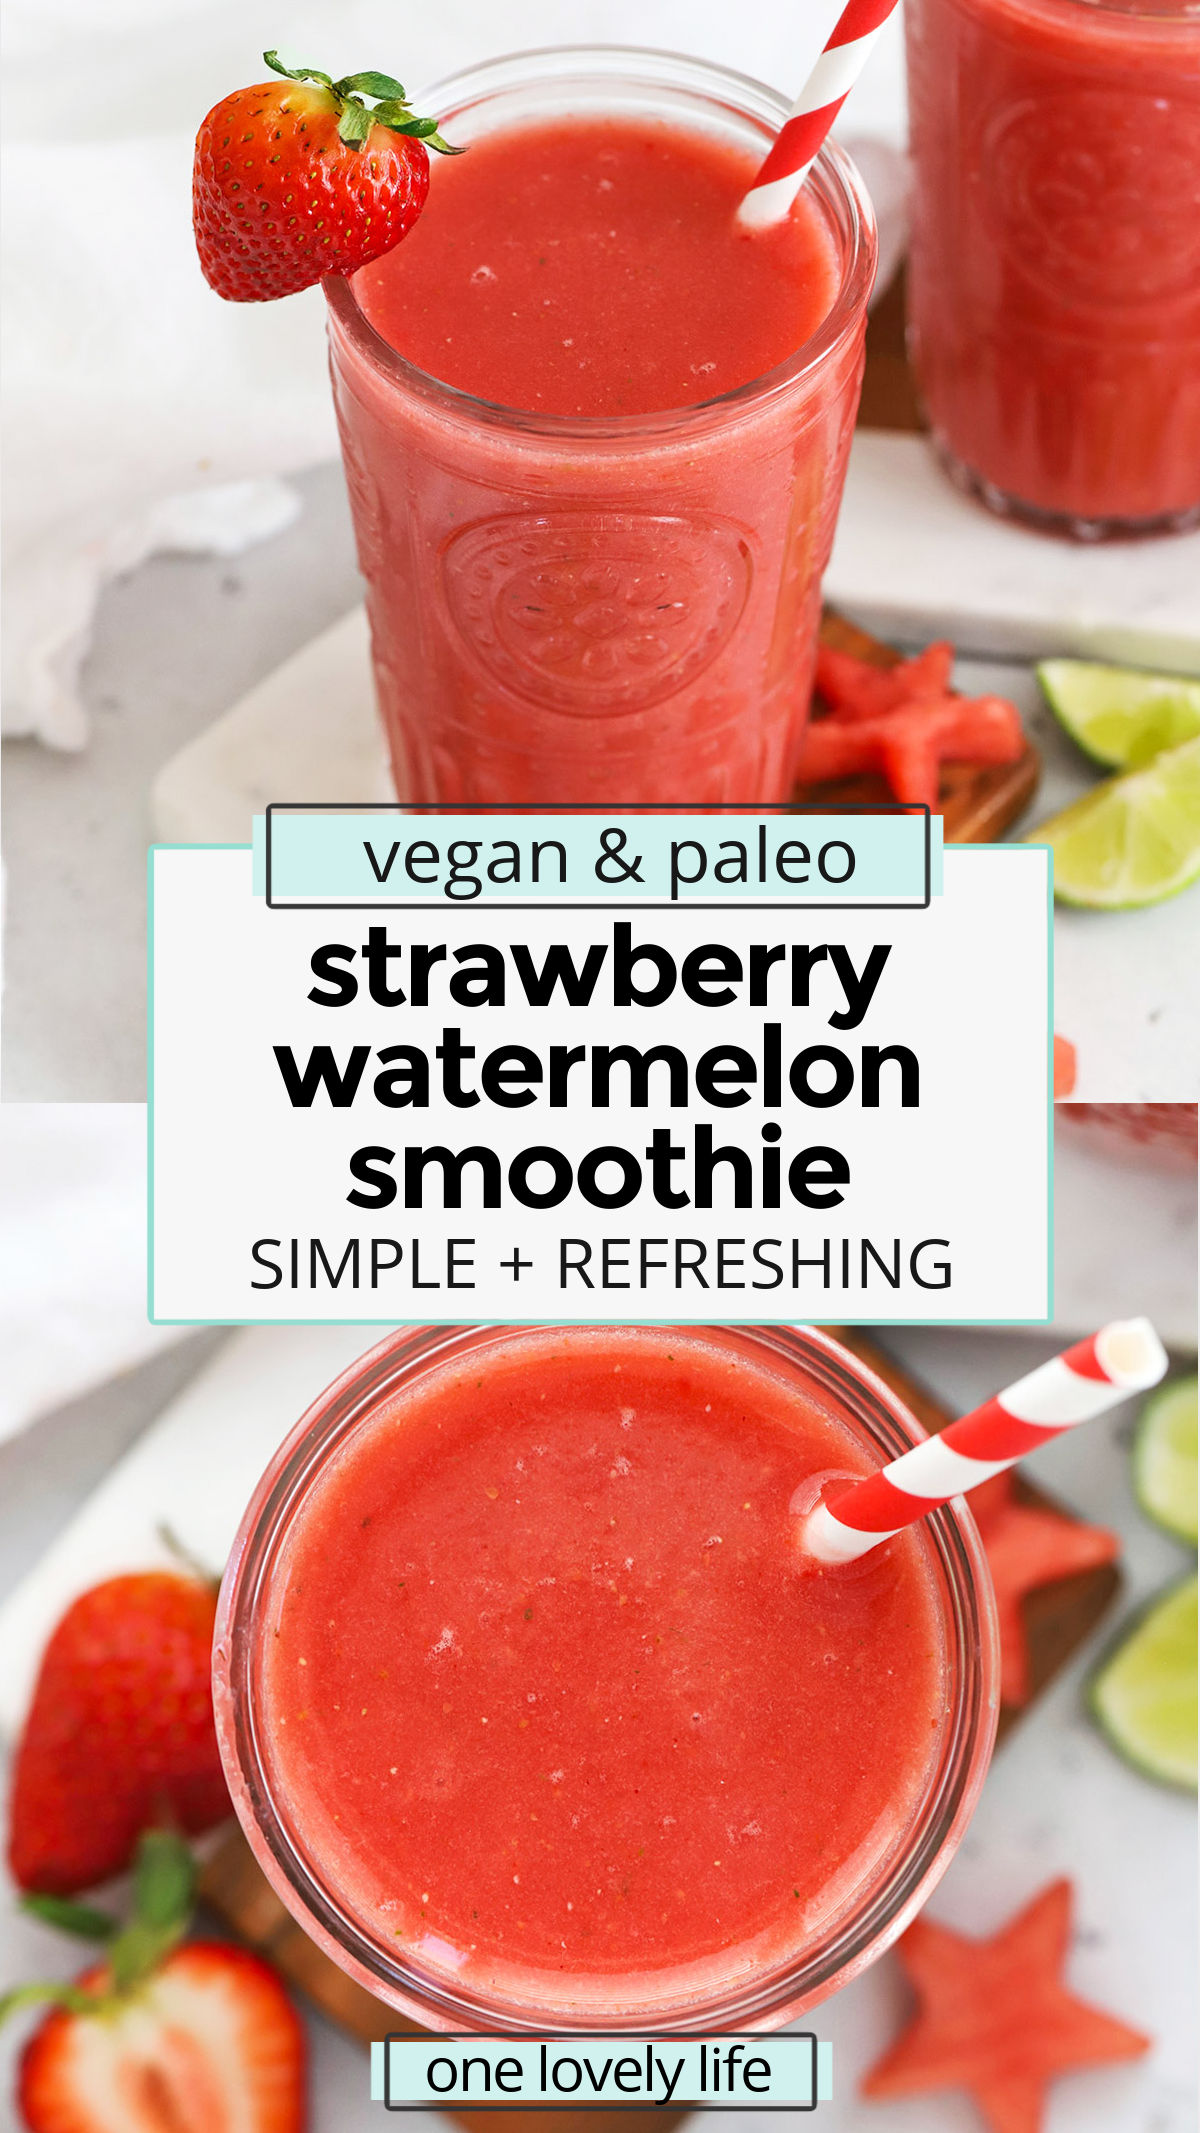 Strawberry Watermelon Smoothie - This is the best watermelon smoothie recipe we know! Super hydrating, delicious & easy! // berry watermelon smoothie / the best watermelon smoothies // strawberry watermelon smoothies // smoothie with watermelon / berry watermelon smoothies // summer smoothies // watermelon recipes / vegan smoothie / fruit smoothie / hydrating drinks / electrolyte drink / healthy summer drink / healthy smoothie / paleo